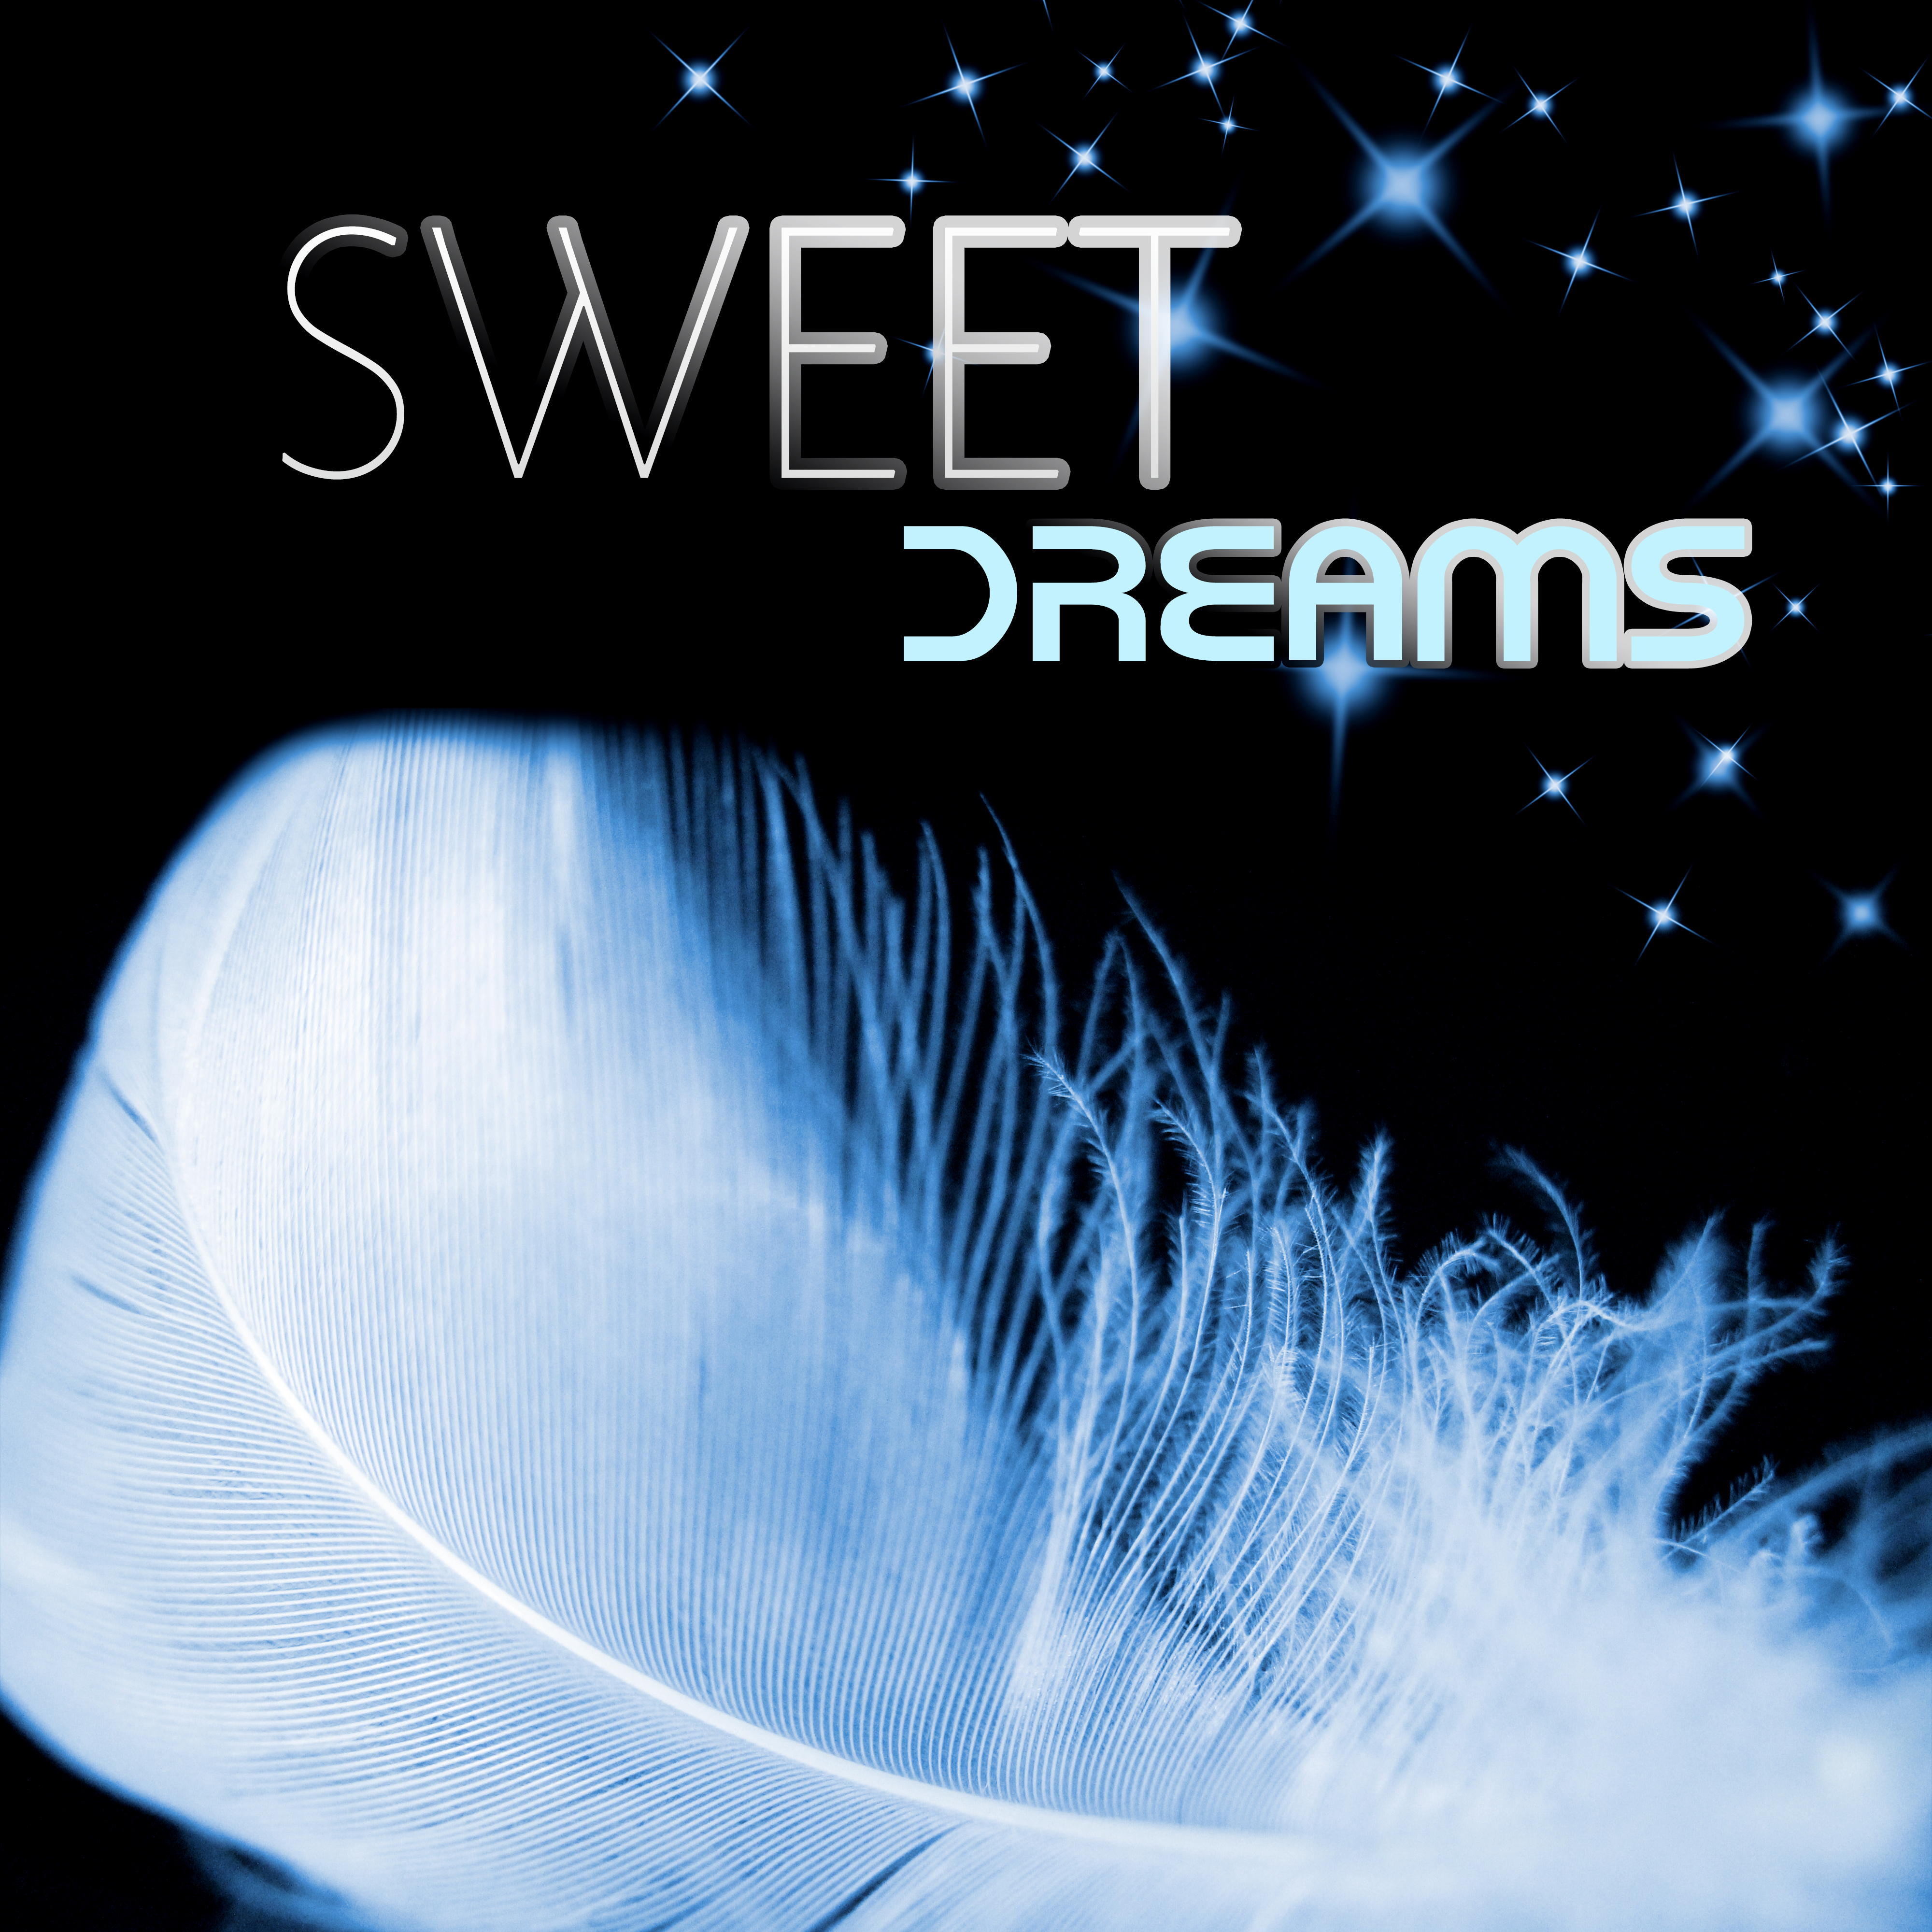 Sweet Dreams – Sleep Music to Help You Relax, Natural White Noise, Soothing Songs, Insomnia Cure, Dreaming